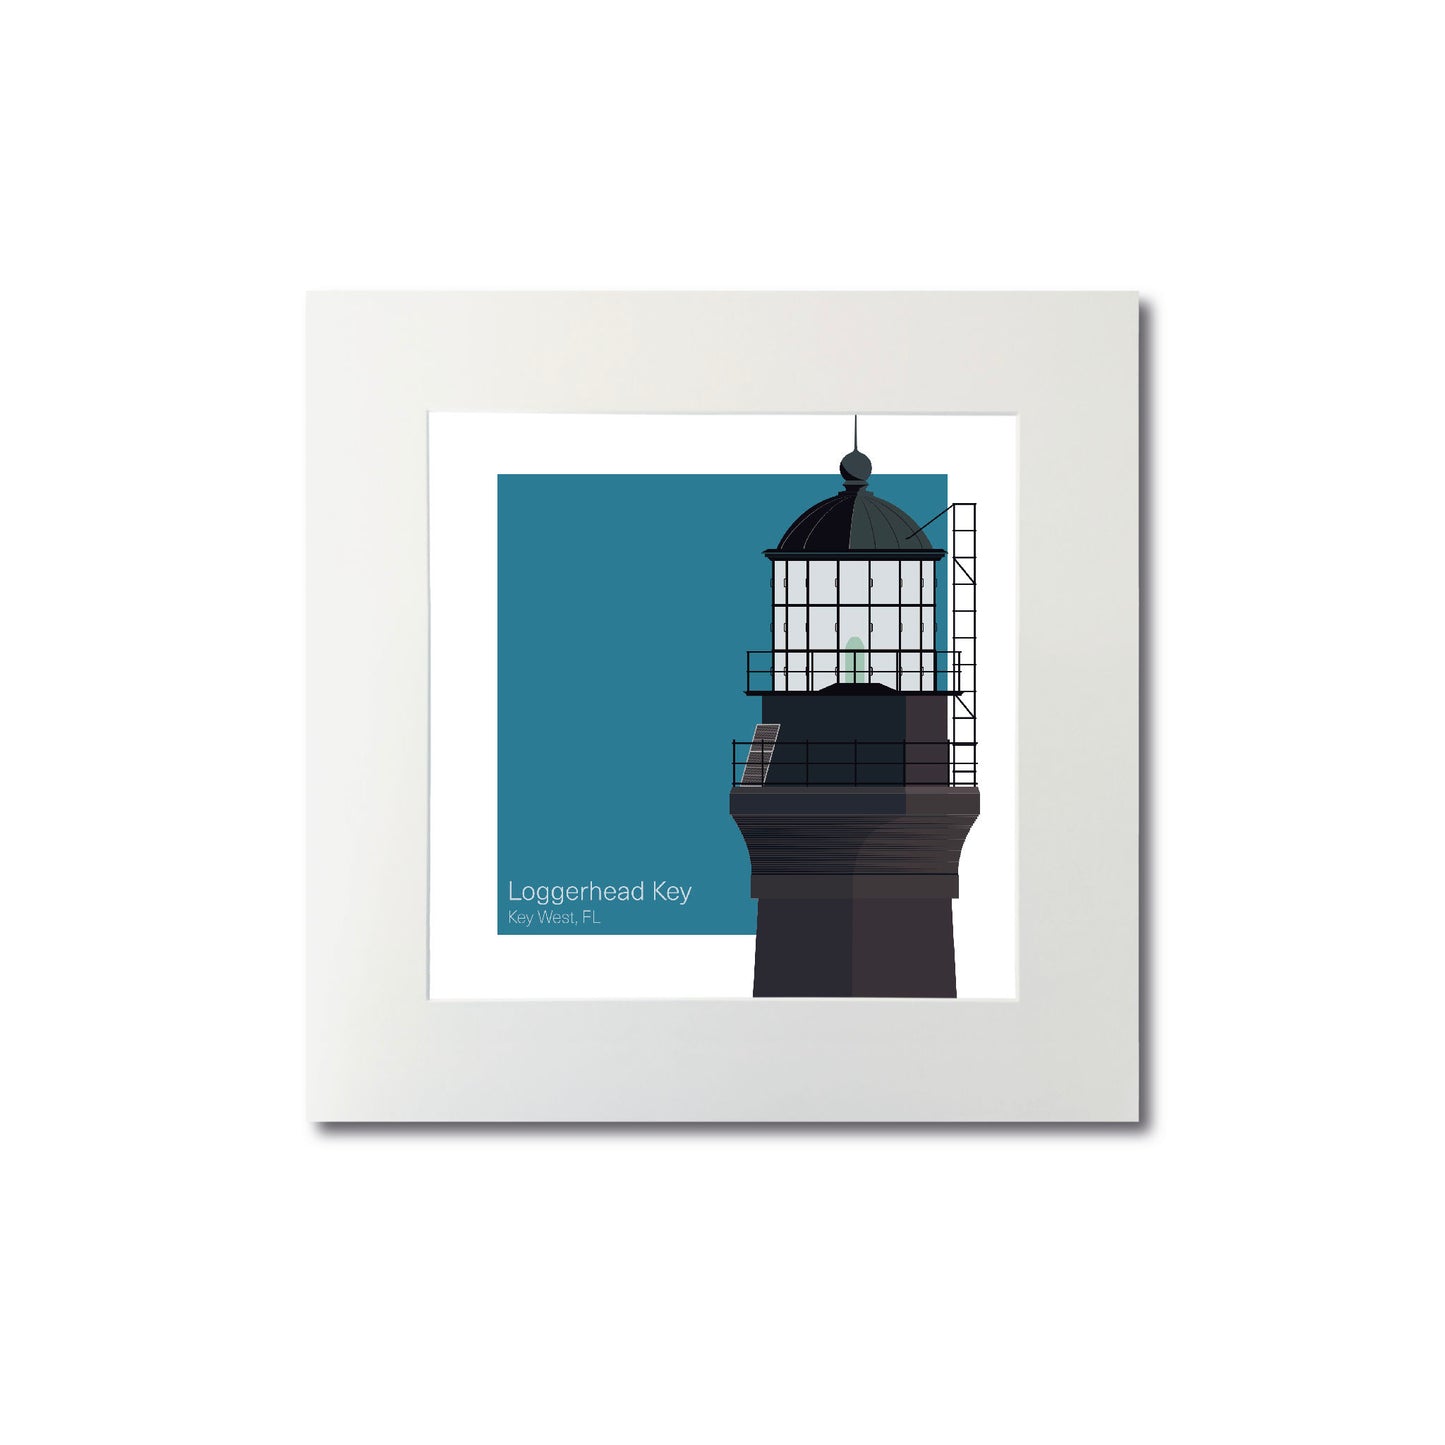 Illustration of the Loggerhead lighthouse, FL, USA. On a white background with aqua blue square as a backdrop., mounted and measuring 8"x8" (20x20cm).